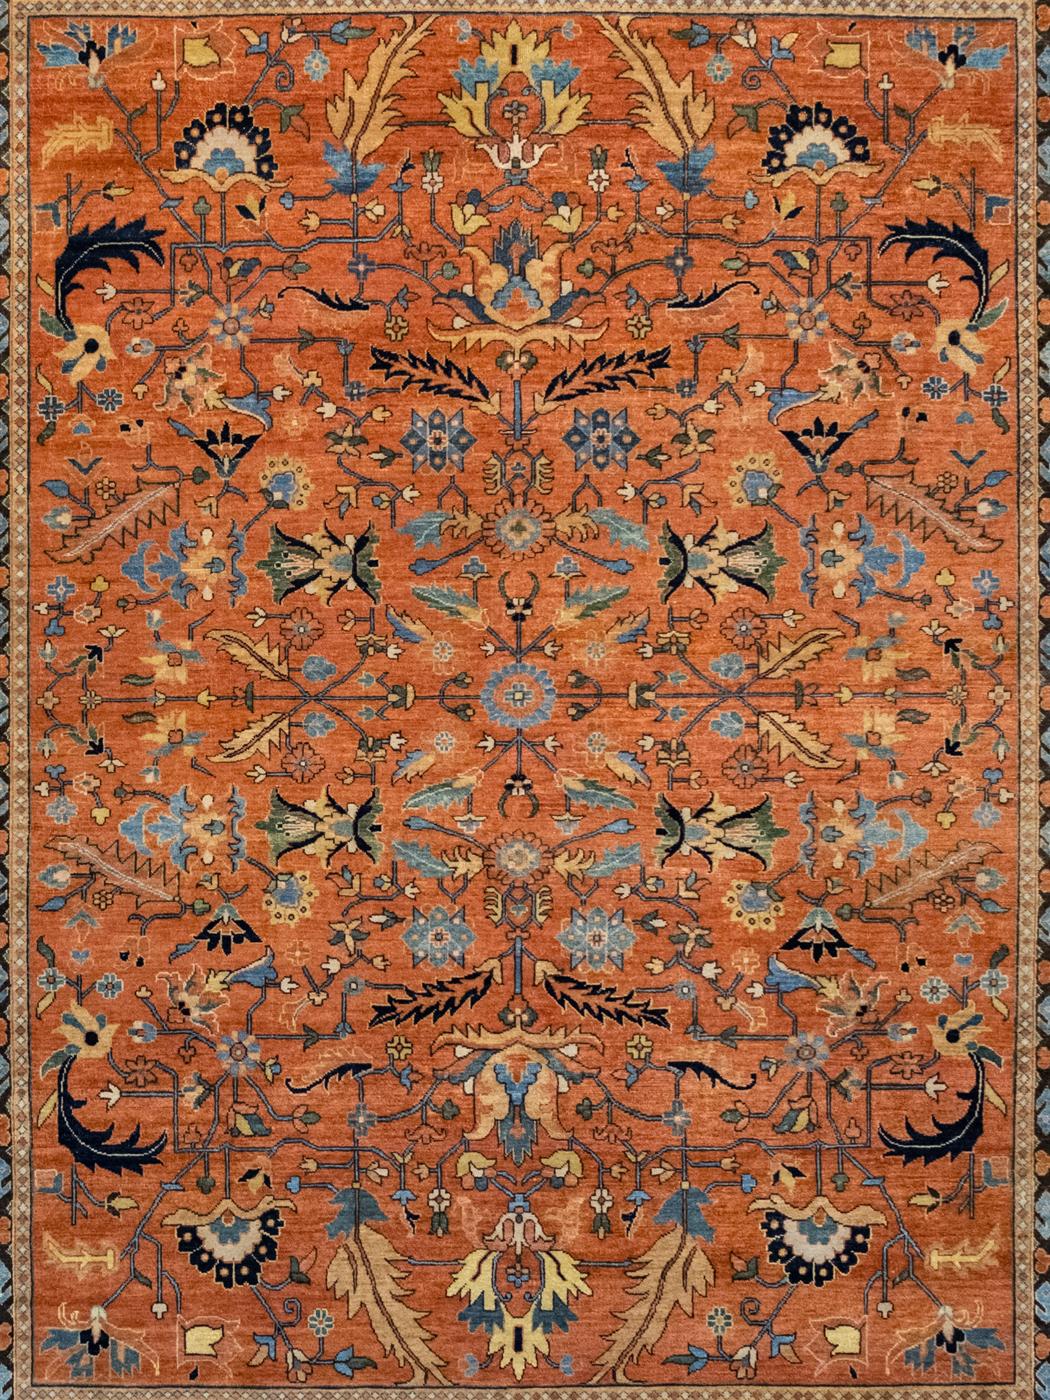 Utilizing a classic symmetrical design, this modern Persian Serapi carpet measures 7’10”x9’10” and is detailed in shades of orange, indigo, gold, cream, and black wool. Blooming from a small floral medallion, tribal-inspired flower bulbs,